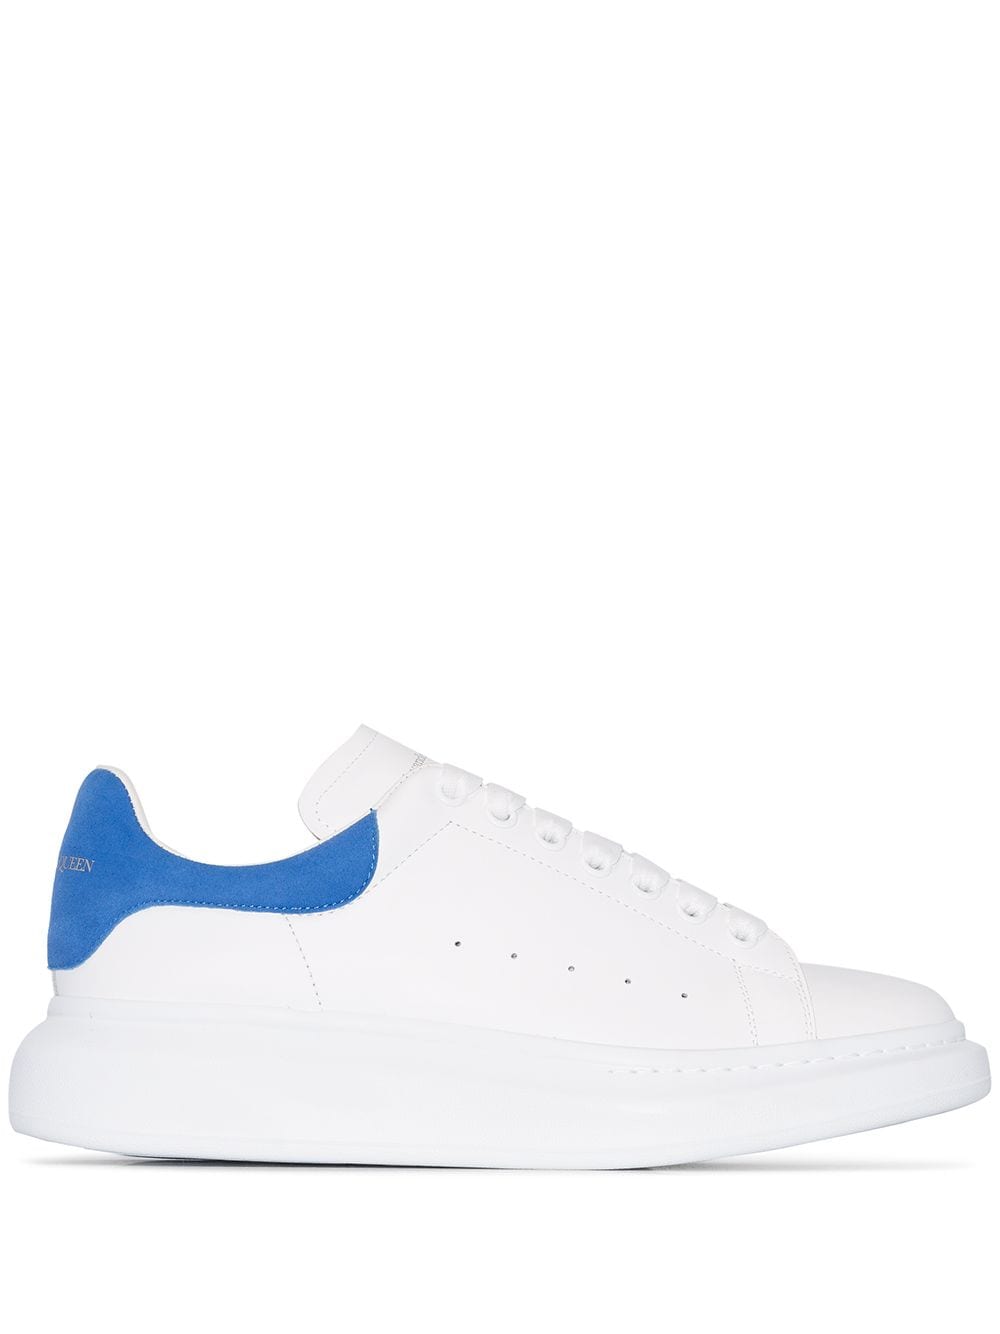 ALEXANDER MCQUEEN White Leather Sneakers for Men